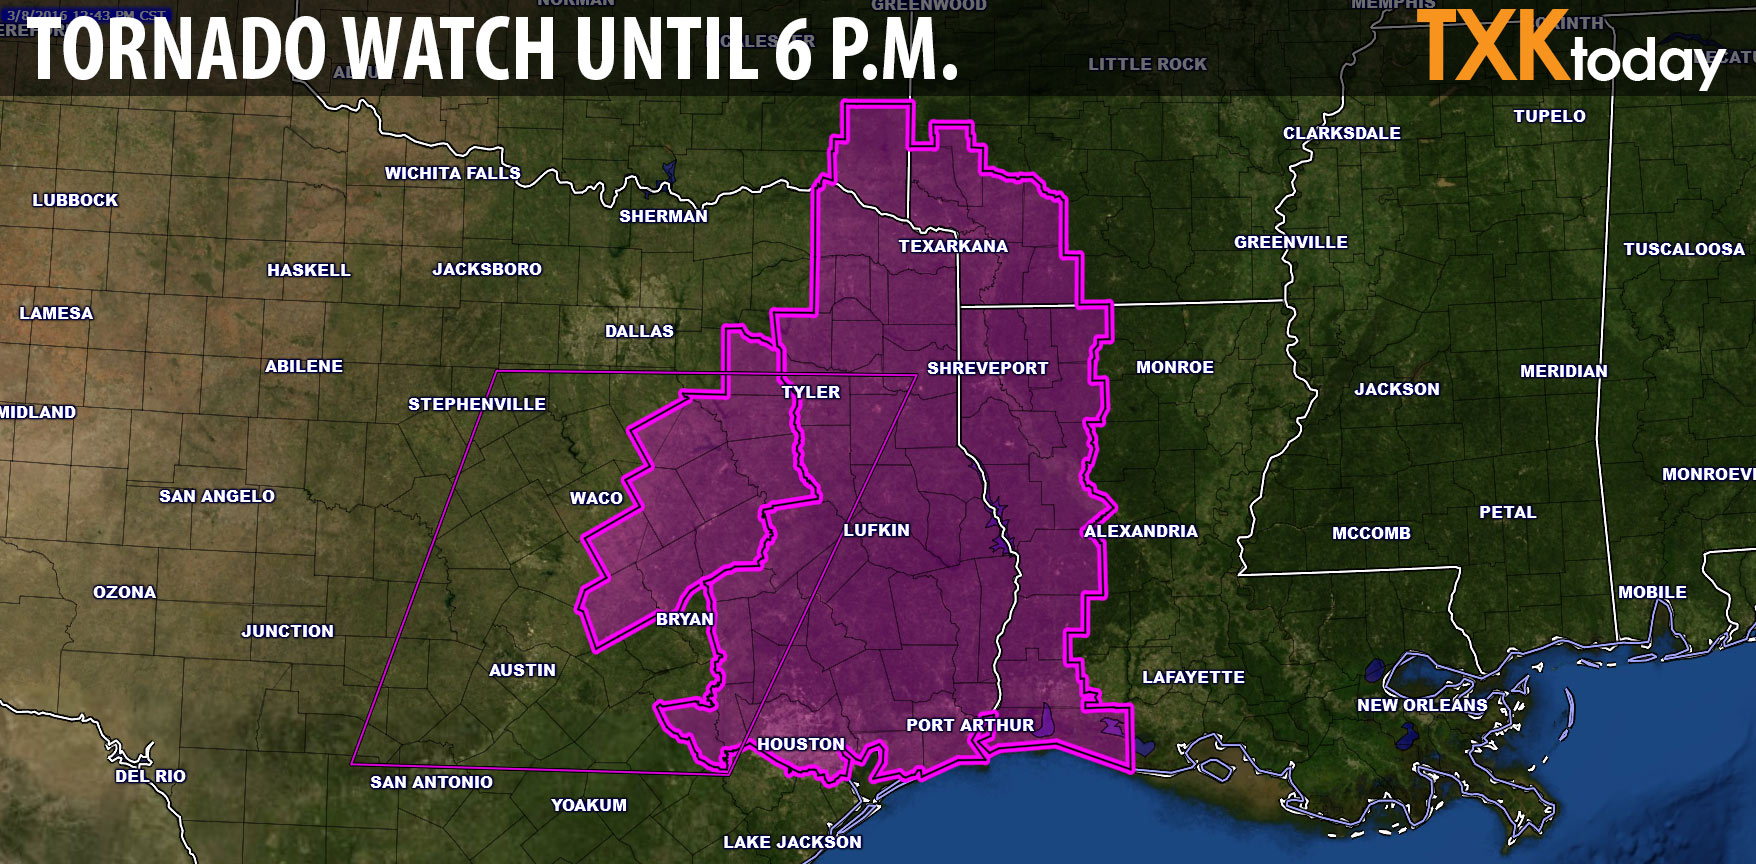 Tornado Watch issued until 6 p.m. | Texarkana Today